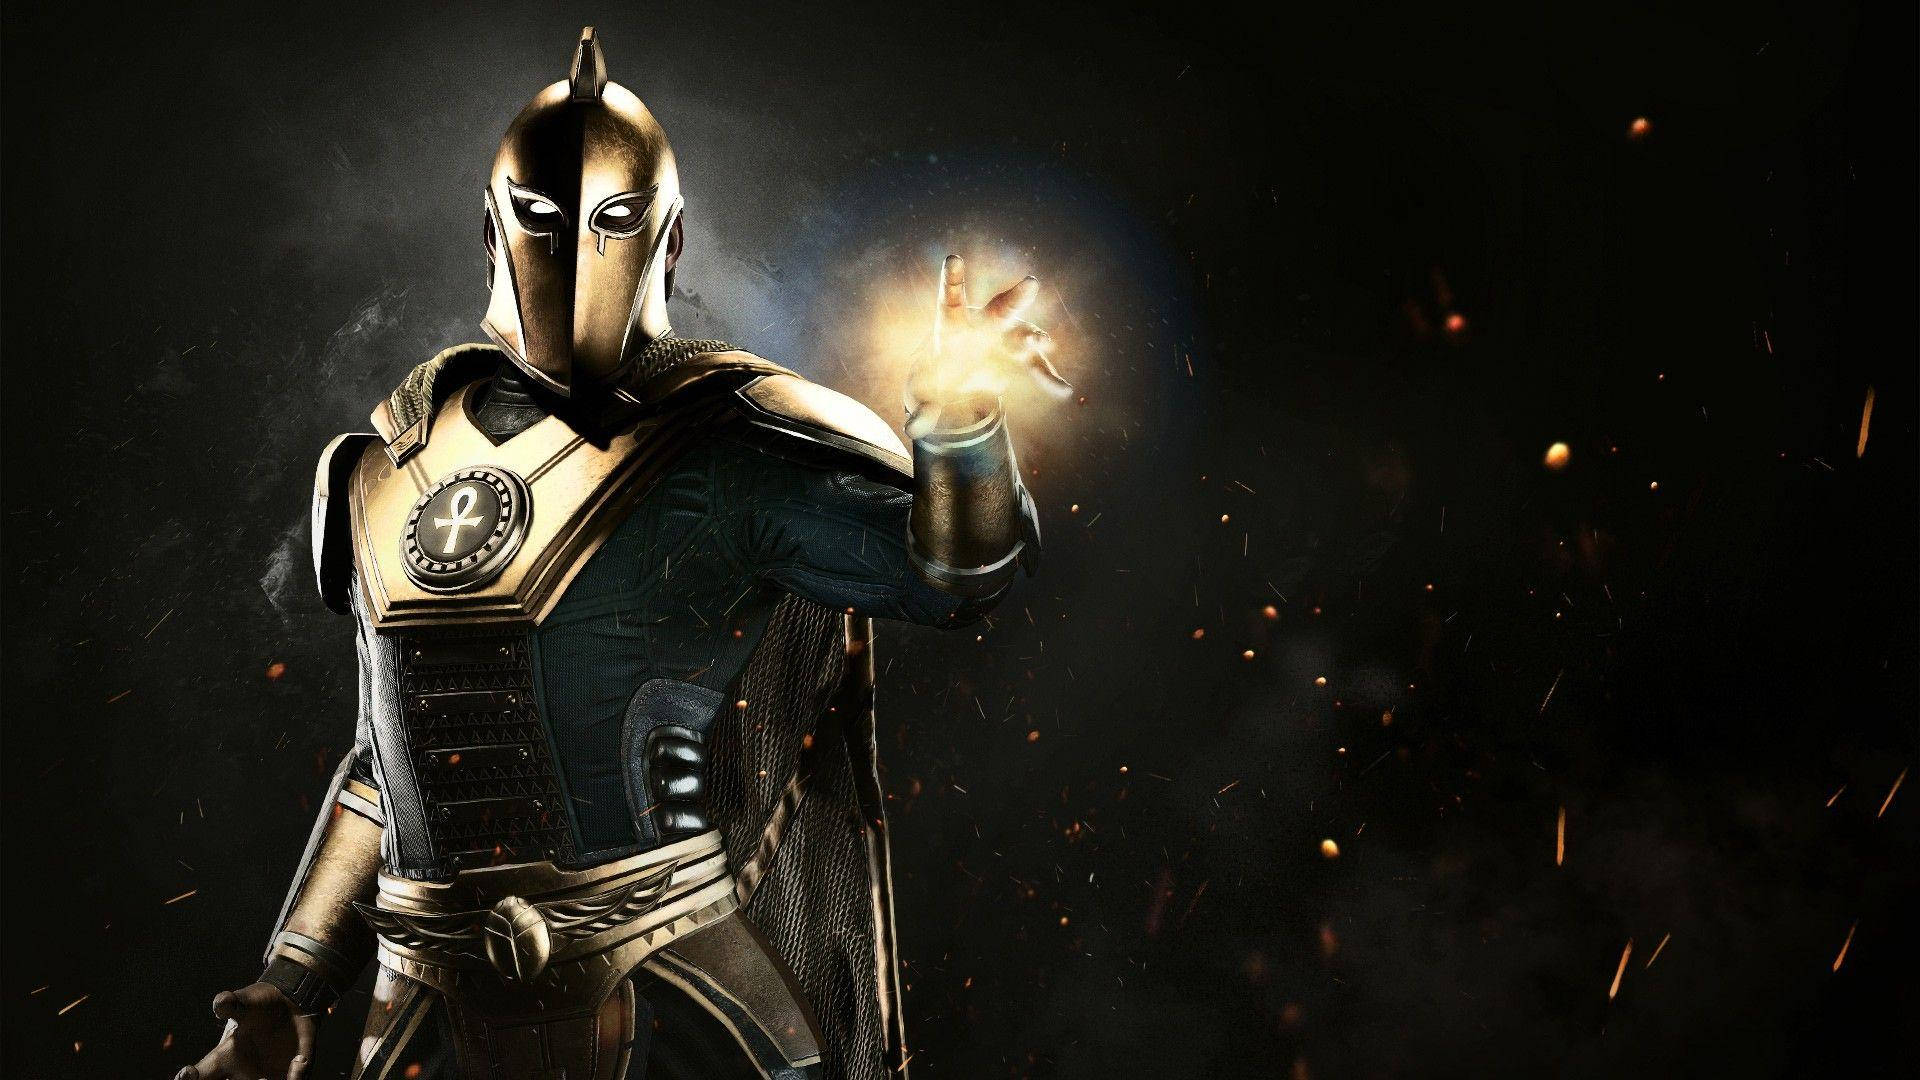 Doctor Fate Of Injustice 2 Wallpaper